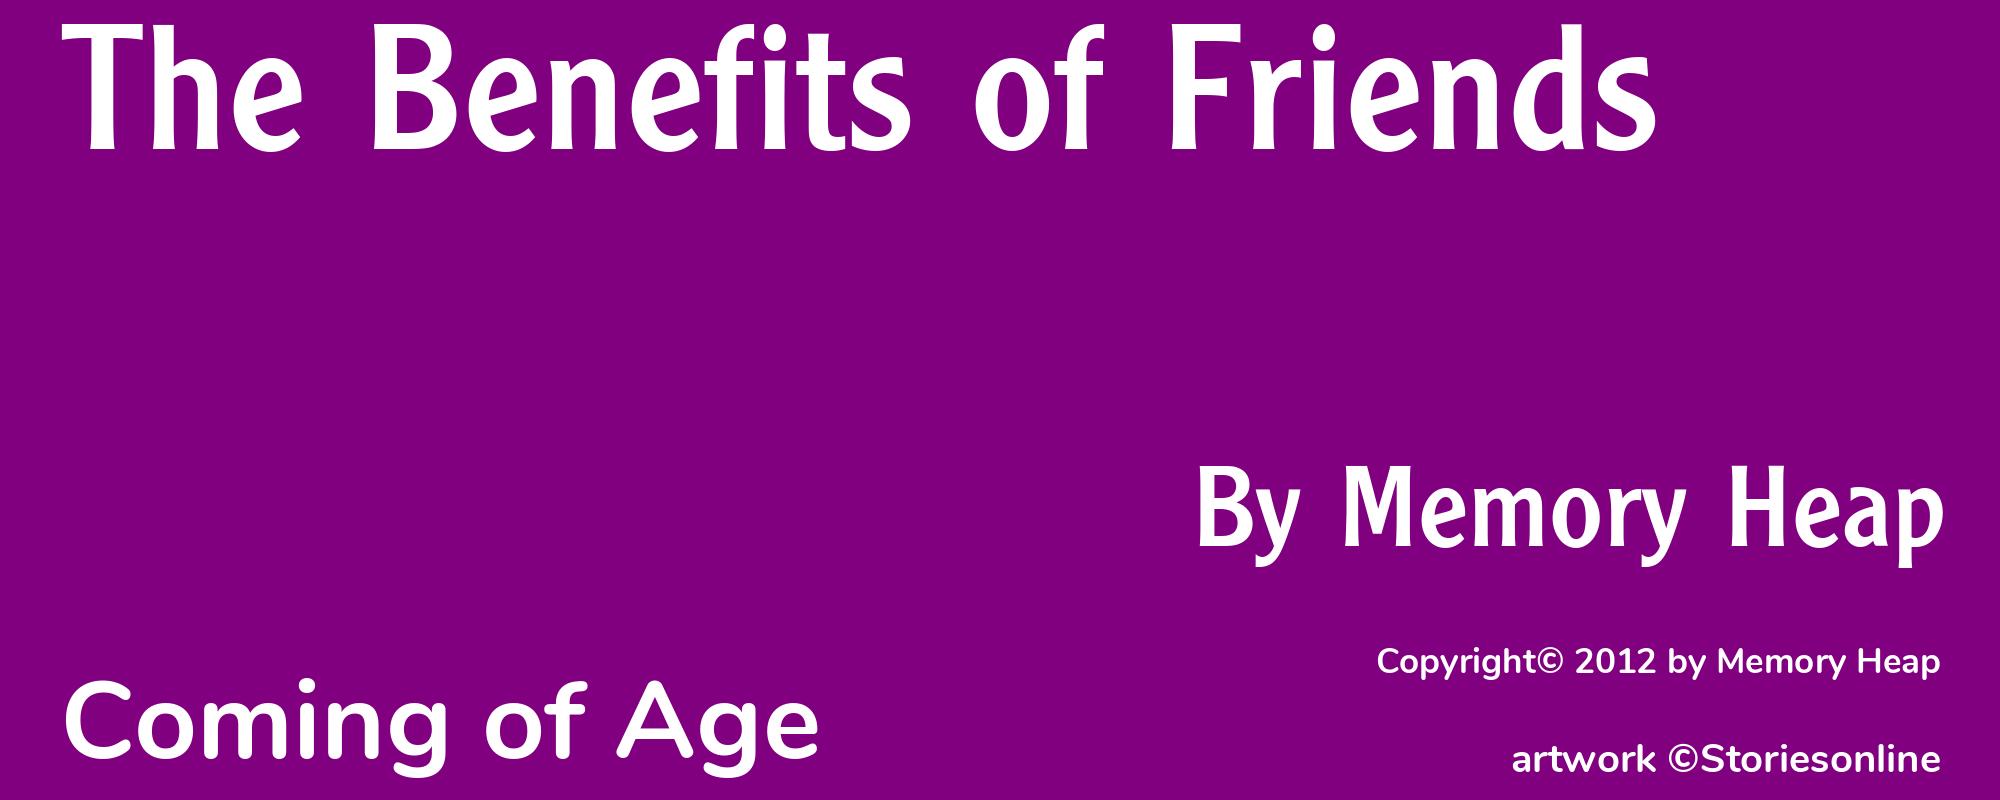 The Benefits of Friends - Cover